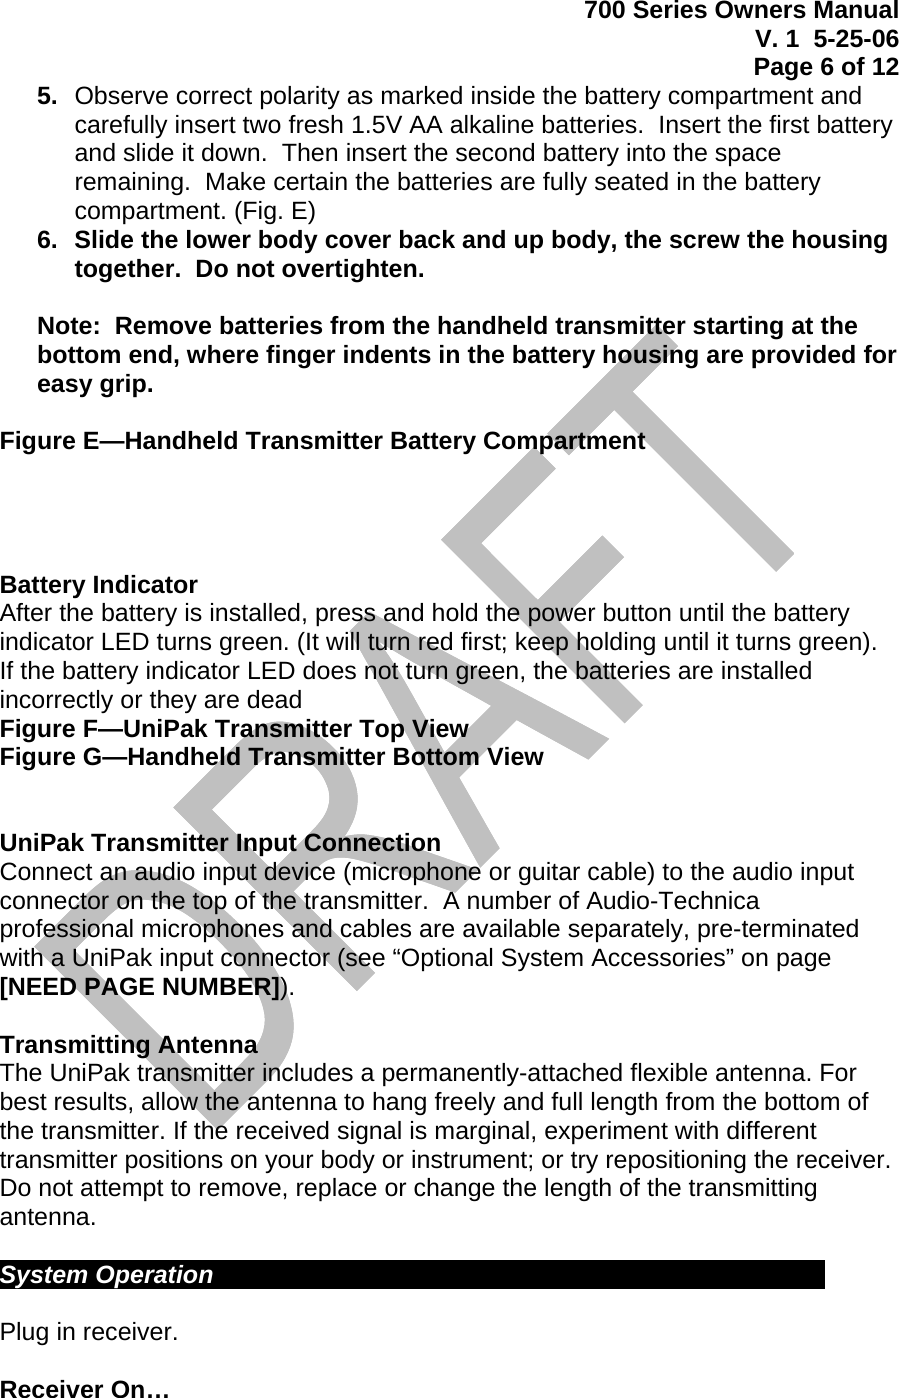 700 Series Owners Manual V. 1  5-25-06 Page 6 of 12  5.  Observe correct polarity as marked inside the battery compartment and carefully insert two fresh 1.5V AA alkaline batteries.  Insert the first battery and slide it down.  Then insert the second battery into the space remaining.  Make certain the batteries are fully seated in the battery compartment. (Fig. E) 6.  Slide the lower body cover back and up body, the screw the housing together.  Do not overtighten.  Note:  Remove batteries from the handheld transmitter starting at the bottom end, where finger indents in the battery housing are provided for easy grip.  Figure E—Handheld Transmitter Battery Compartment     Battery Indicator After the battery is installed, press and hold the power button until the battery indicator LED turns green. (It will turn red first; keep holding until it turns green).  If the battery indicator LED does not turn green, the batteries are installed incorrectly or they are dead Figure F—UniPak Transmitter Top View Figure G—Handheld Transmitter Bottom View   UniPak Transmitter Input Connection Connect an audio input device (microphone or guitar cable) to the audio input connector on the top of the transmitter.  A number of Audio-Technica professional microphones and cables are available separately, pre-terminated with a UniPak input connector (see “Optional System Accessories” on page [NEED PAGE NUMBER]).  Transmitting Antenna The UniPak transmitter includes a permanently-attached flexible antenna. For best results, allow the antenna to hang freely and full length from the bottom of the transmitter. If the received signal is marginal, experiment with different transmitter positions on your body or instrument; or try repositioning the receiver. Do not attempt to remove, replace or change the length of the transmitting antenna.  System Operation             Plug in receiver.  Receiver On… 